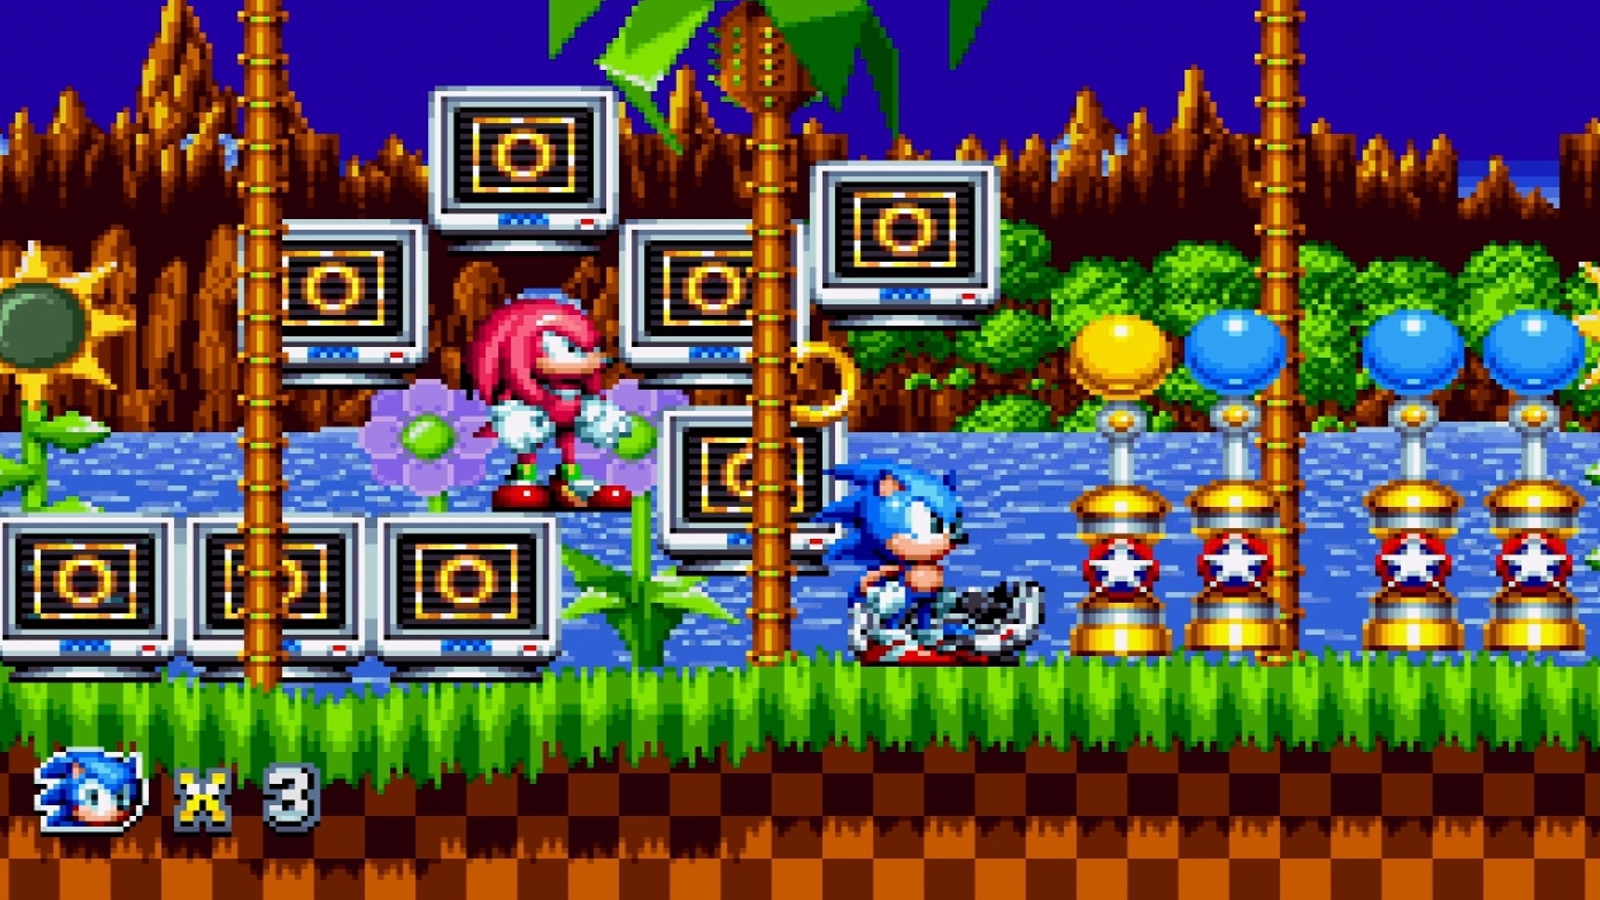 Downloading Sonic mania plus PC and Android - Game Jolt